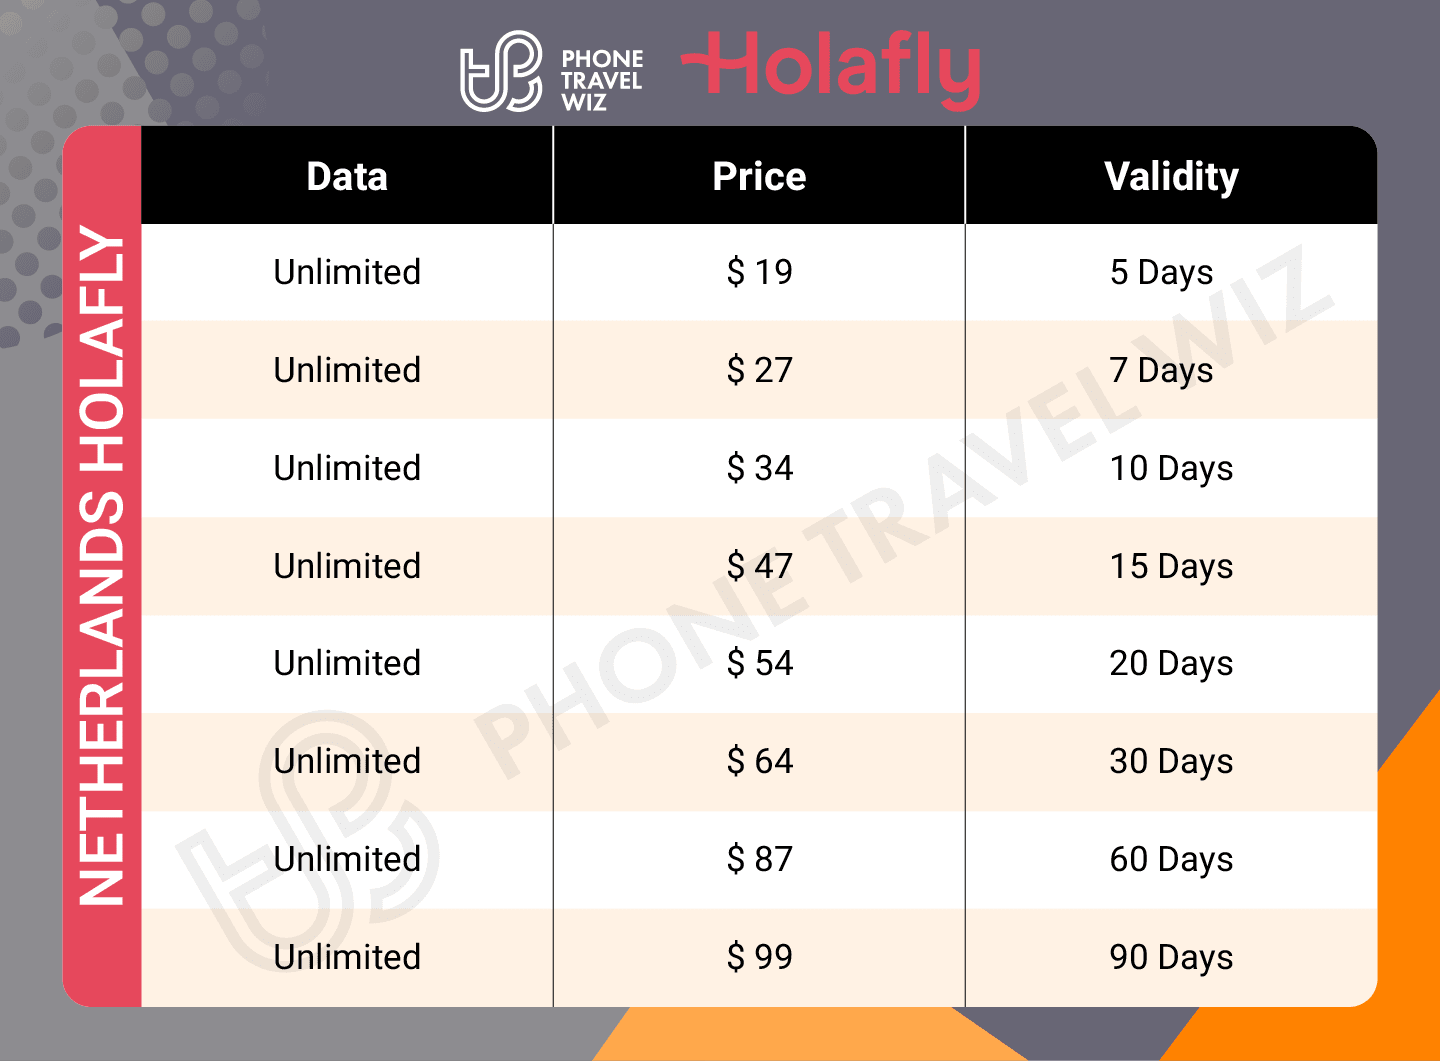 Holafly Netherlands eSIM Price & Data Details Infographic by Phone Travel Wiz